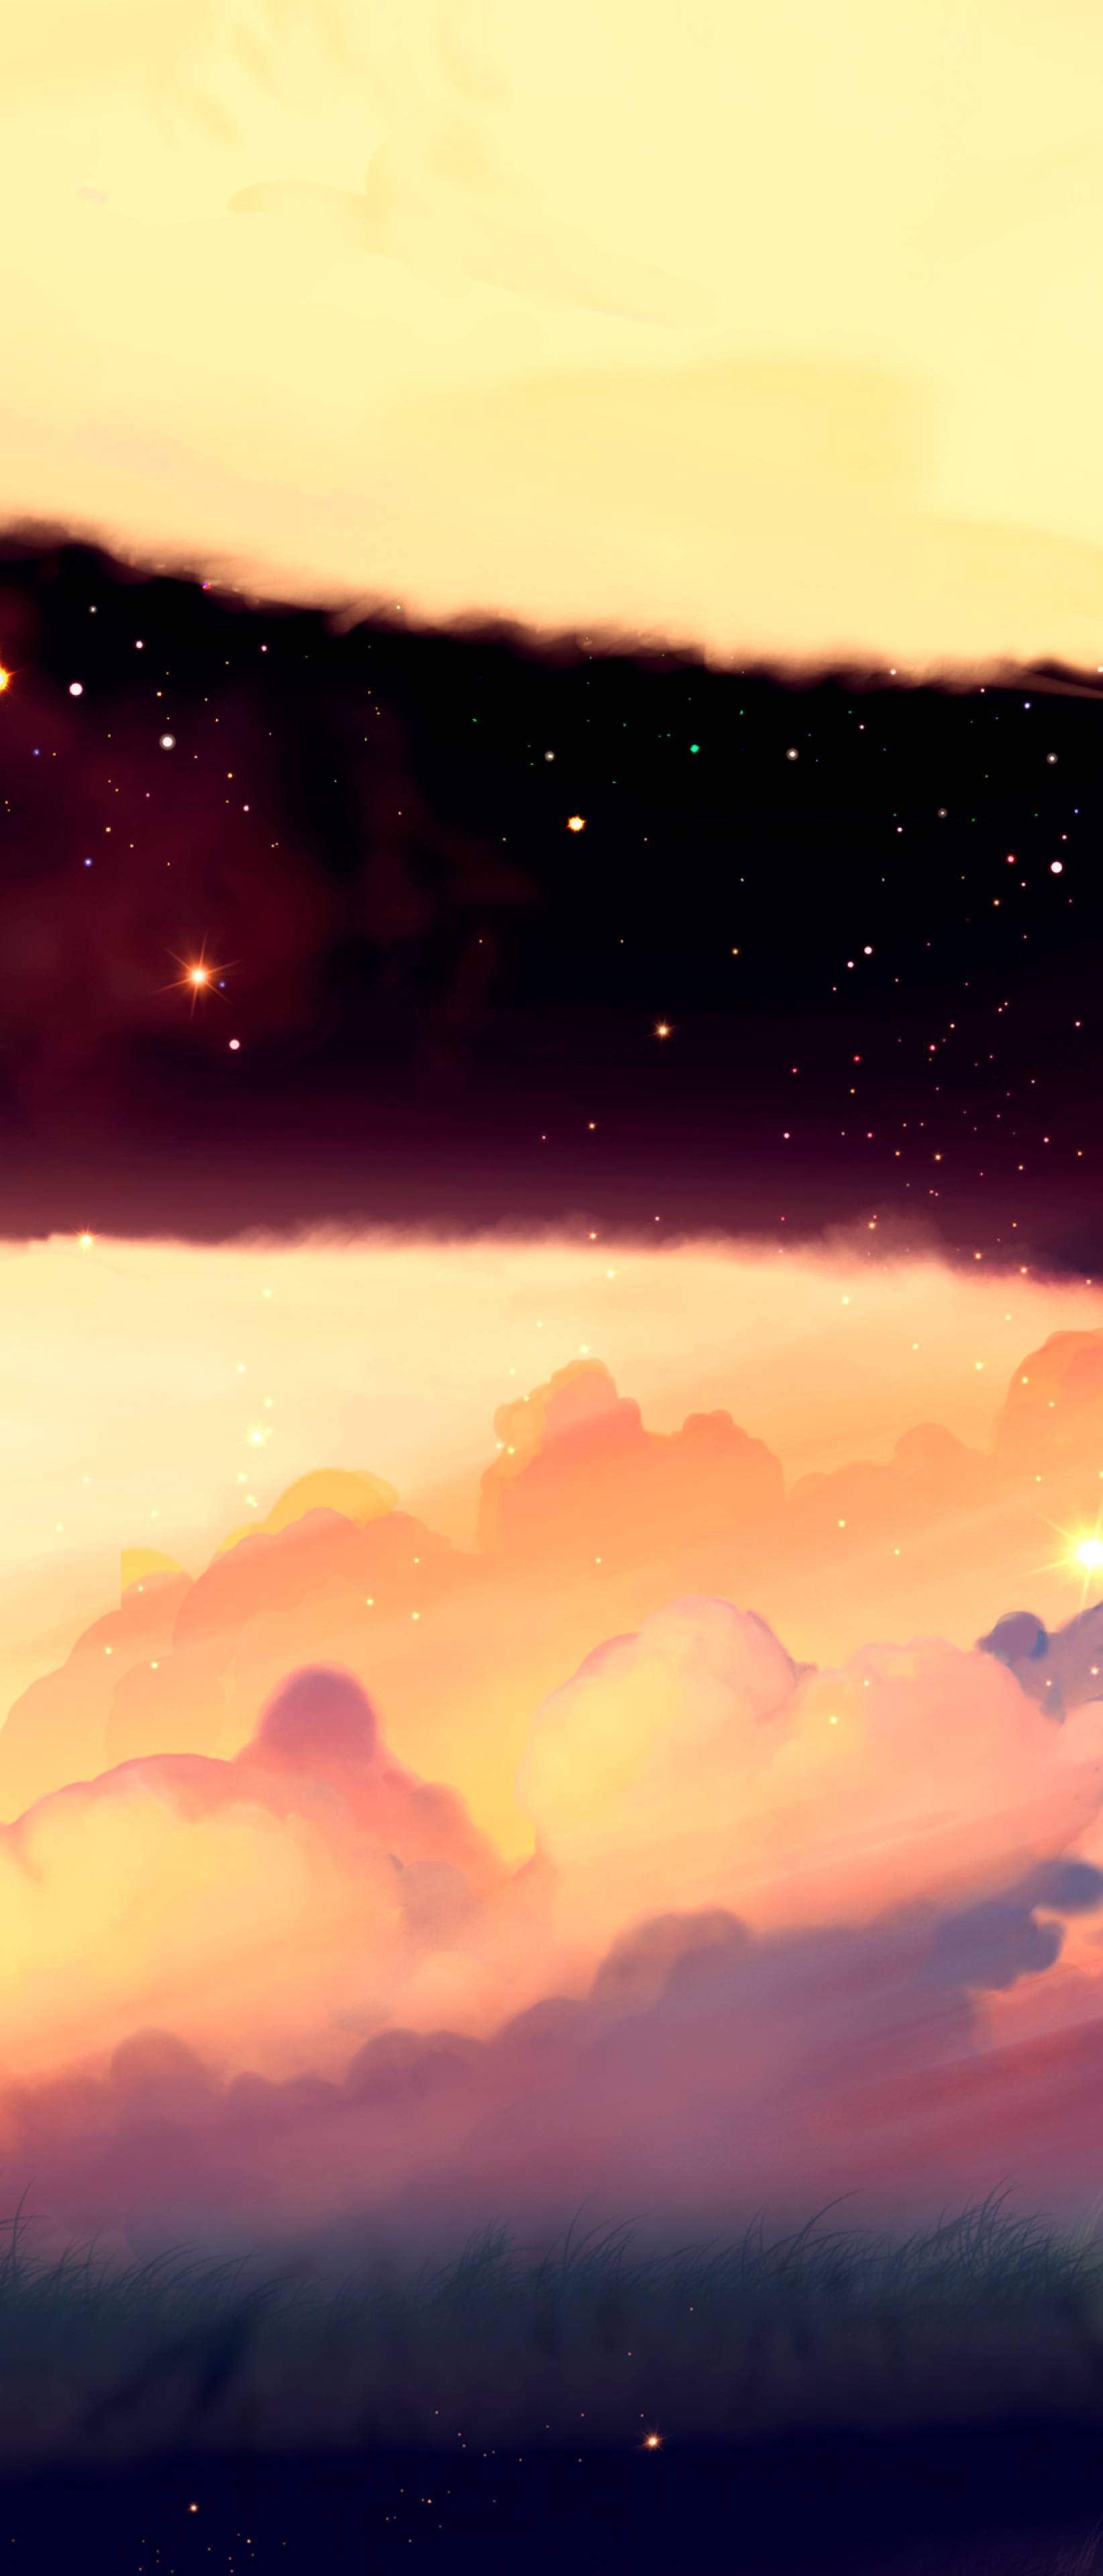 A beautiful night sky with stars and clouds wallpaper 1242x2688 - Anime sunset